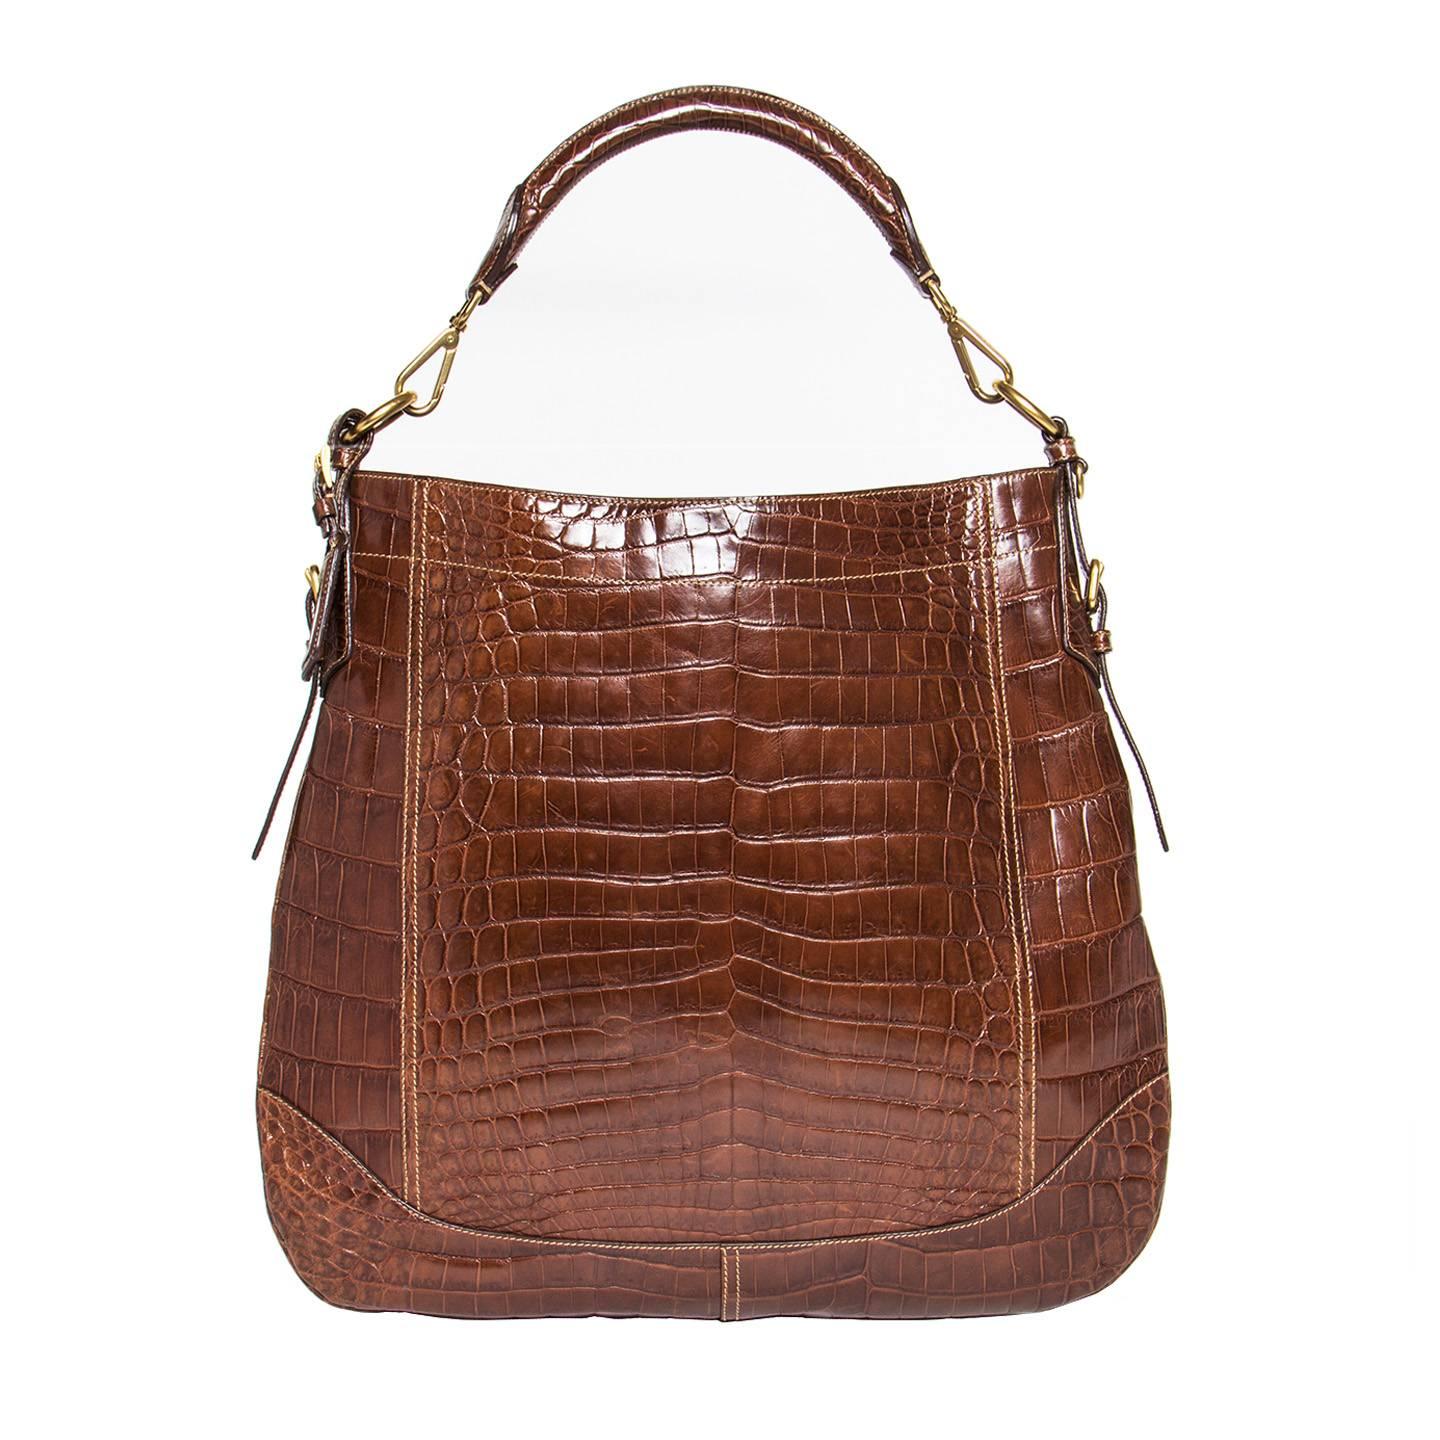 Brown crocodile medium hobo bag with Prada brushed gold metal letters at front. The sides are enriched by straps with little belt buckles and front and back are characterized by geometric panels. The shoulder strap is rounded and is attached to the